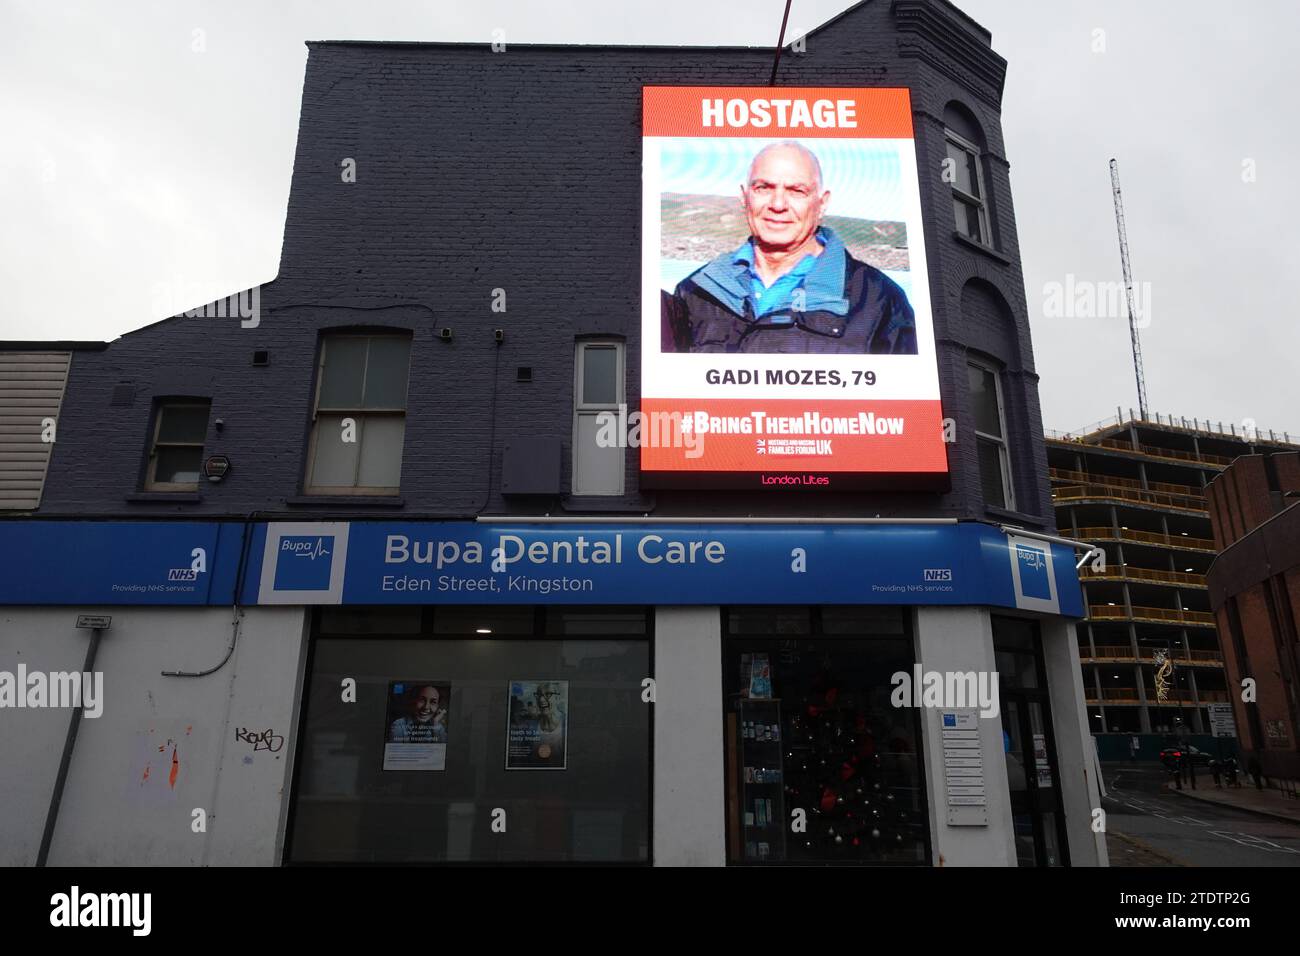 An unusual sight on a digital advertising screen in central Kingston upon Thames - the images and names of the hostages being held by Hamas. Stock Photo